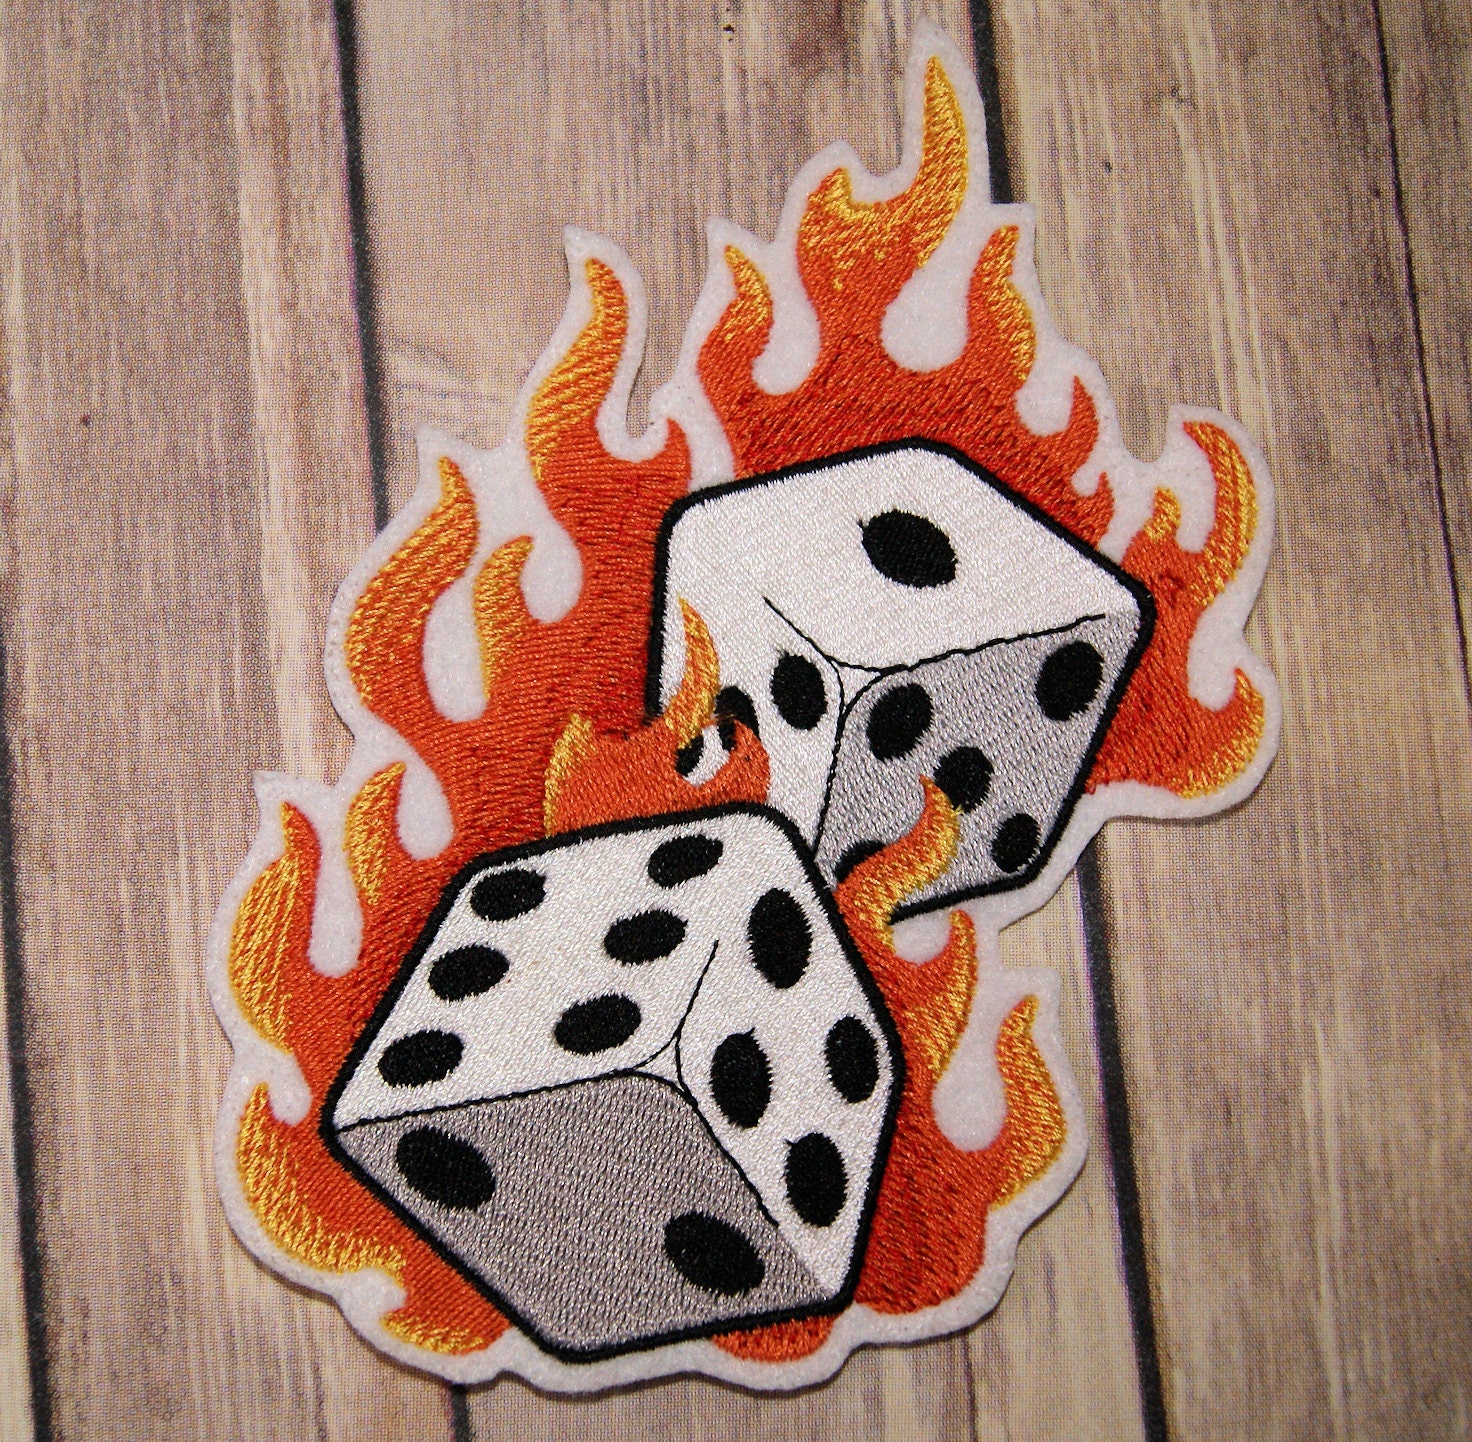 Large Flaming Dice and Pair of Aces Iron-on Embroidered Patch Aces Poker  Embroidery Back Patch Patches for Jacket, Backpack & More 05 